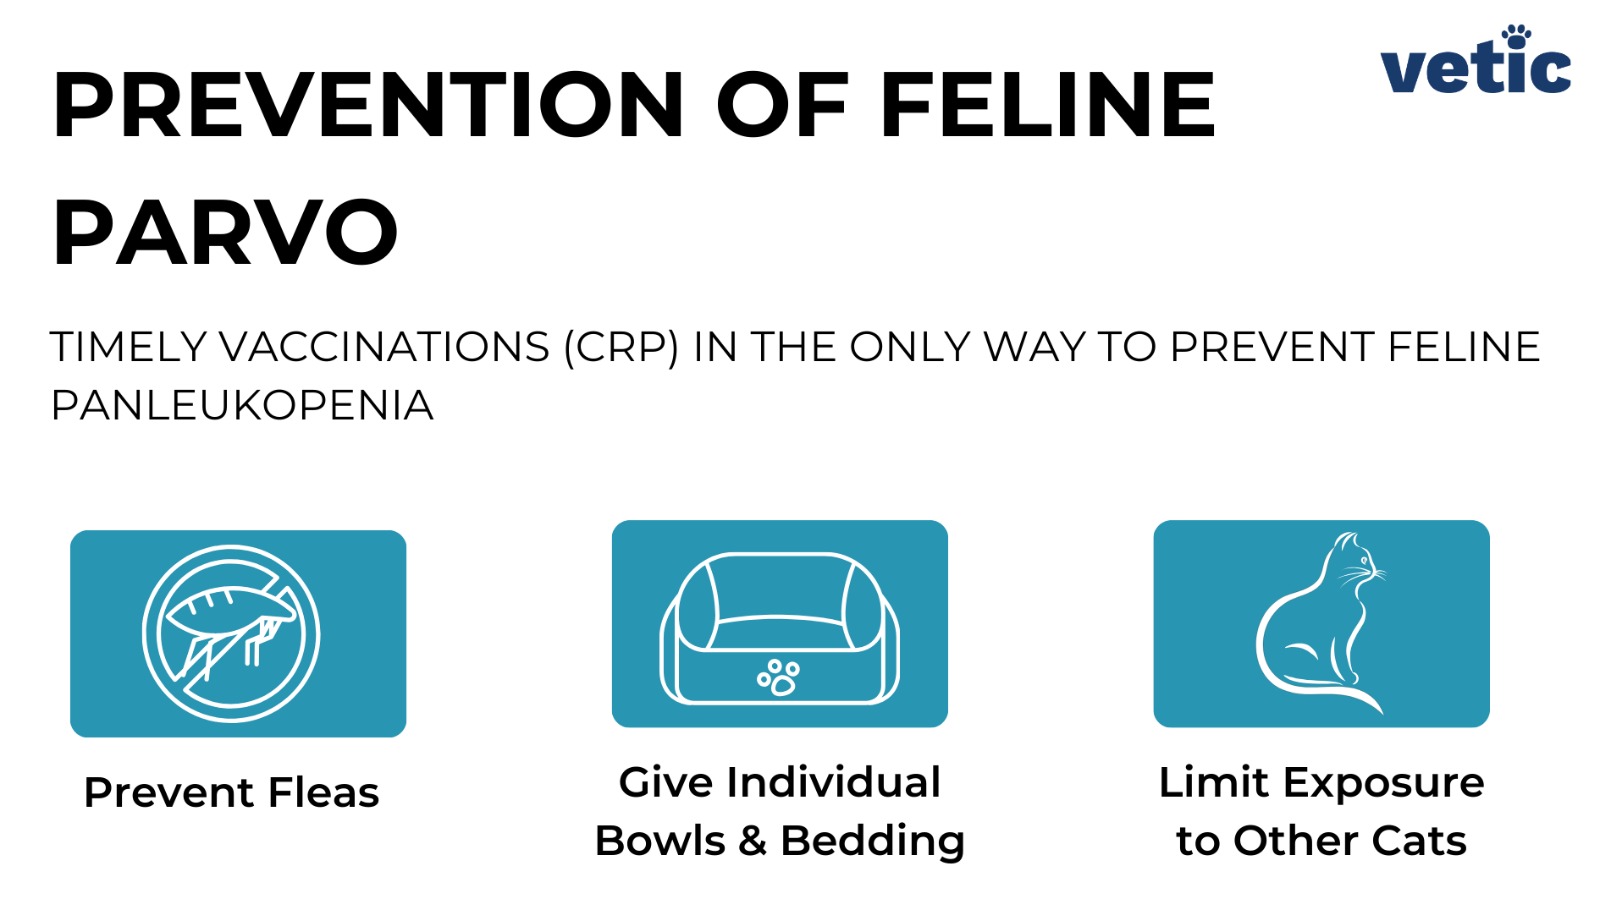 Infographic 4 Prevention of Feline Parvo Timely Vaccinations (CRP) in the ONLY Way to Prevent Feline Panleukopenia Additional Measures - Prevent Fleas Give Individual Bowls & Bedding Limit Exposure to Other Cats